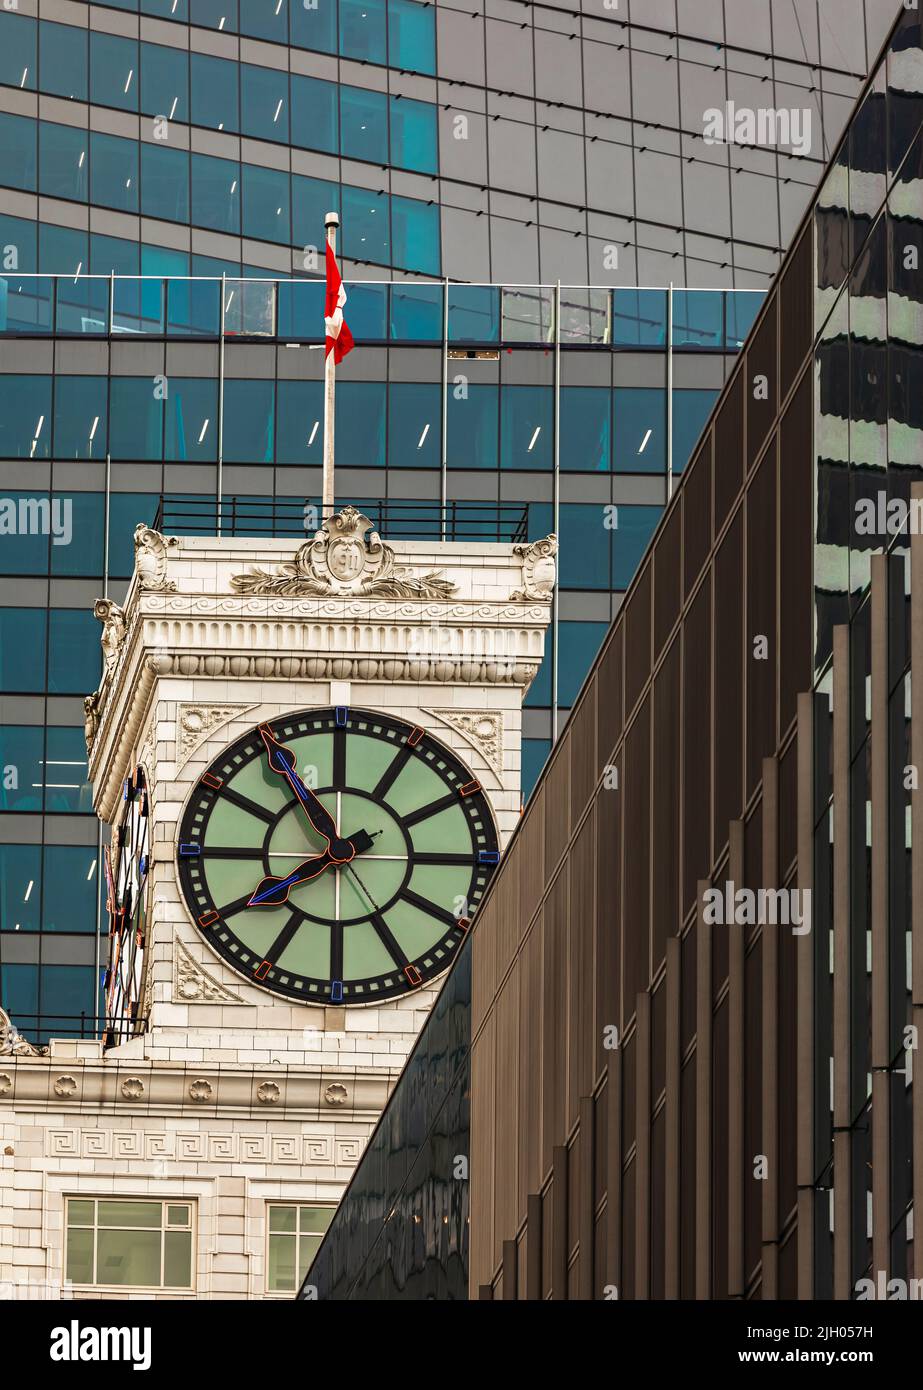 The Mission Impossible clock tower with waving Canadian flag is seen atop the white Vancouver Block Building on Granville Street in downtown Vancouver Stock Photo